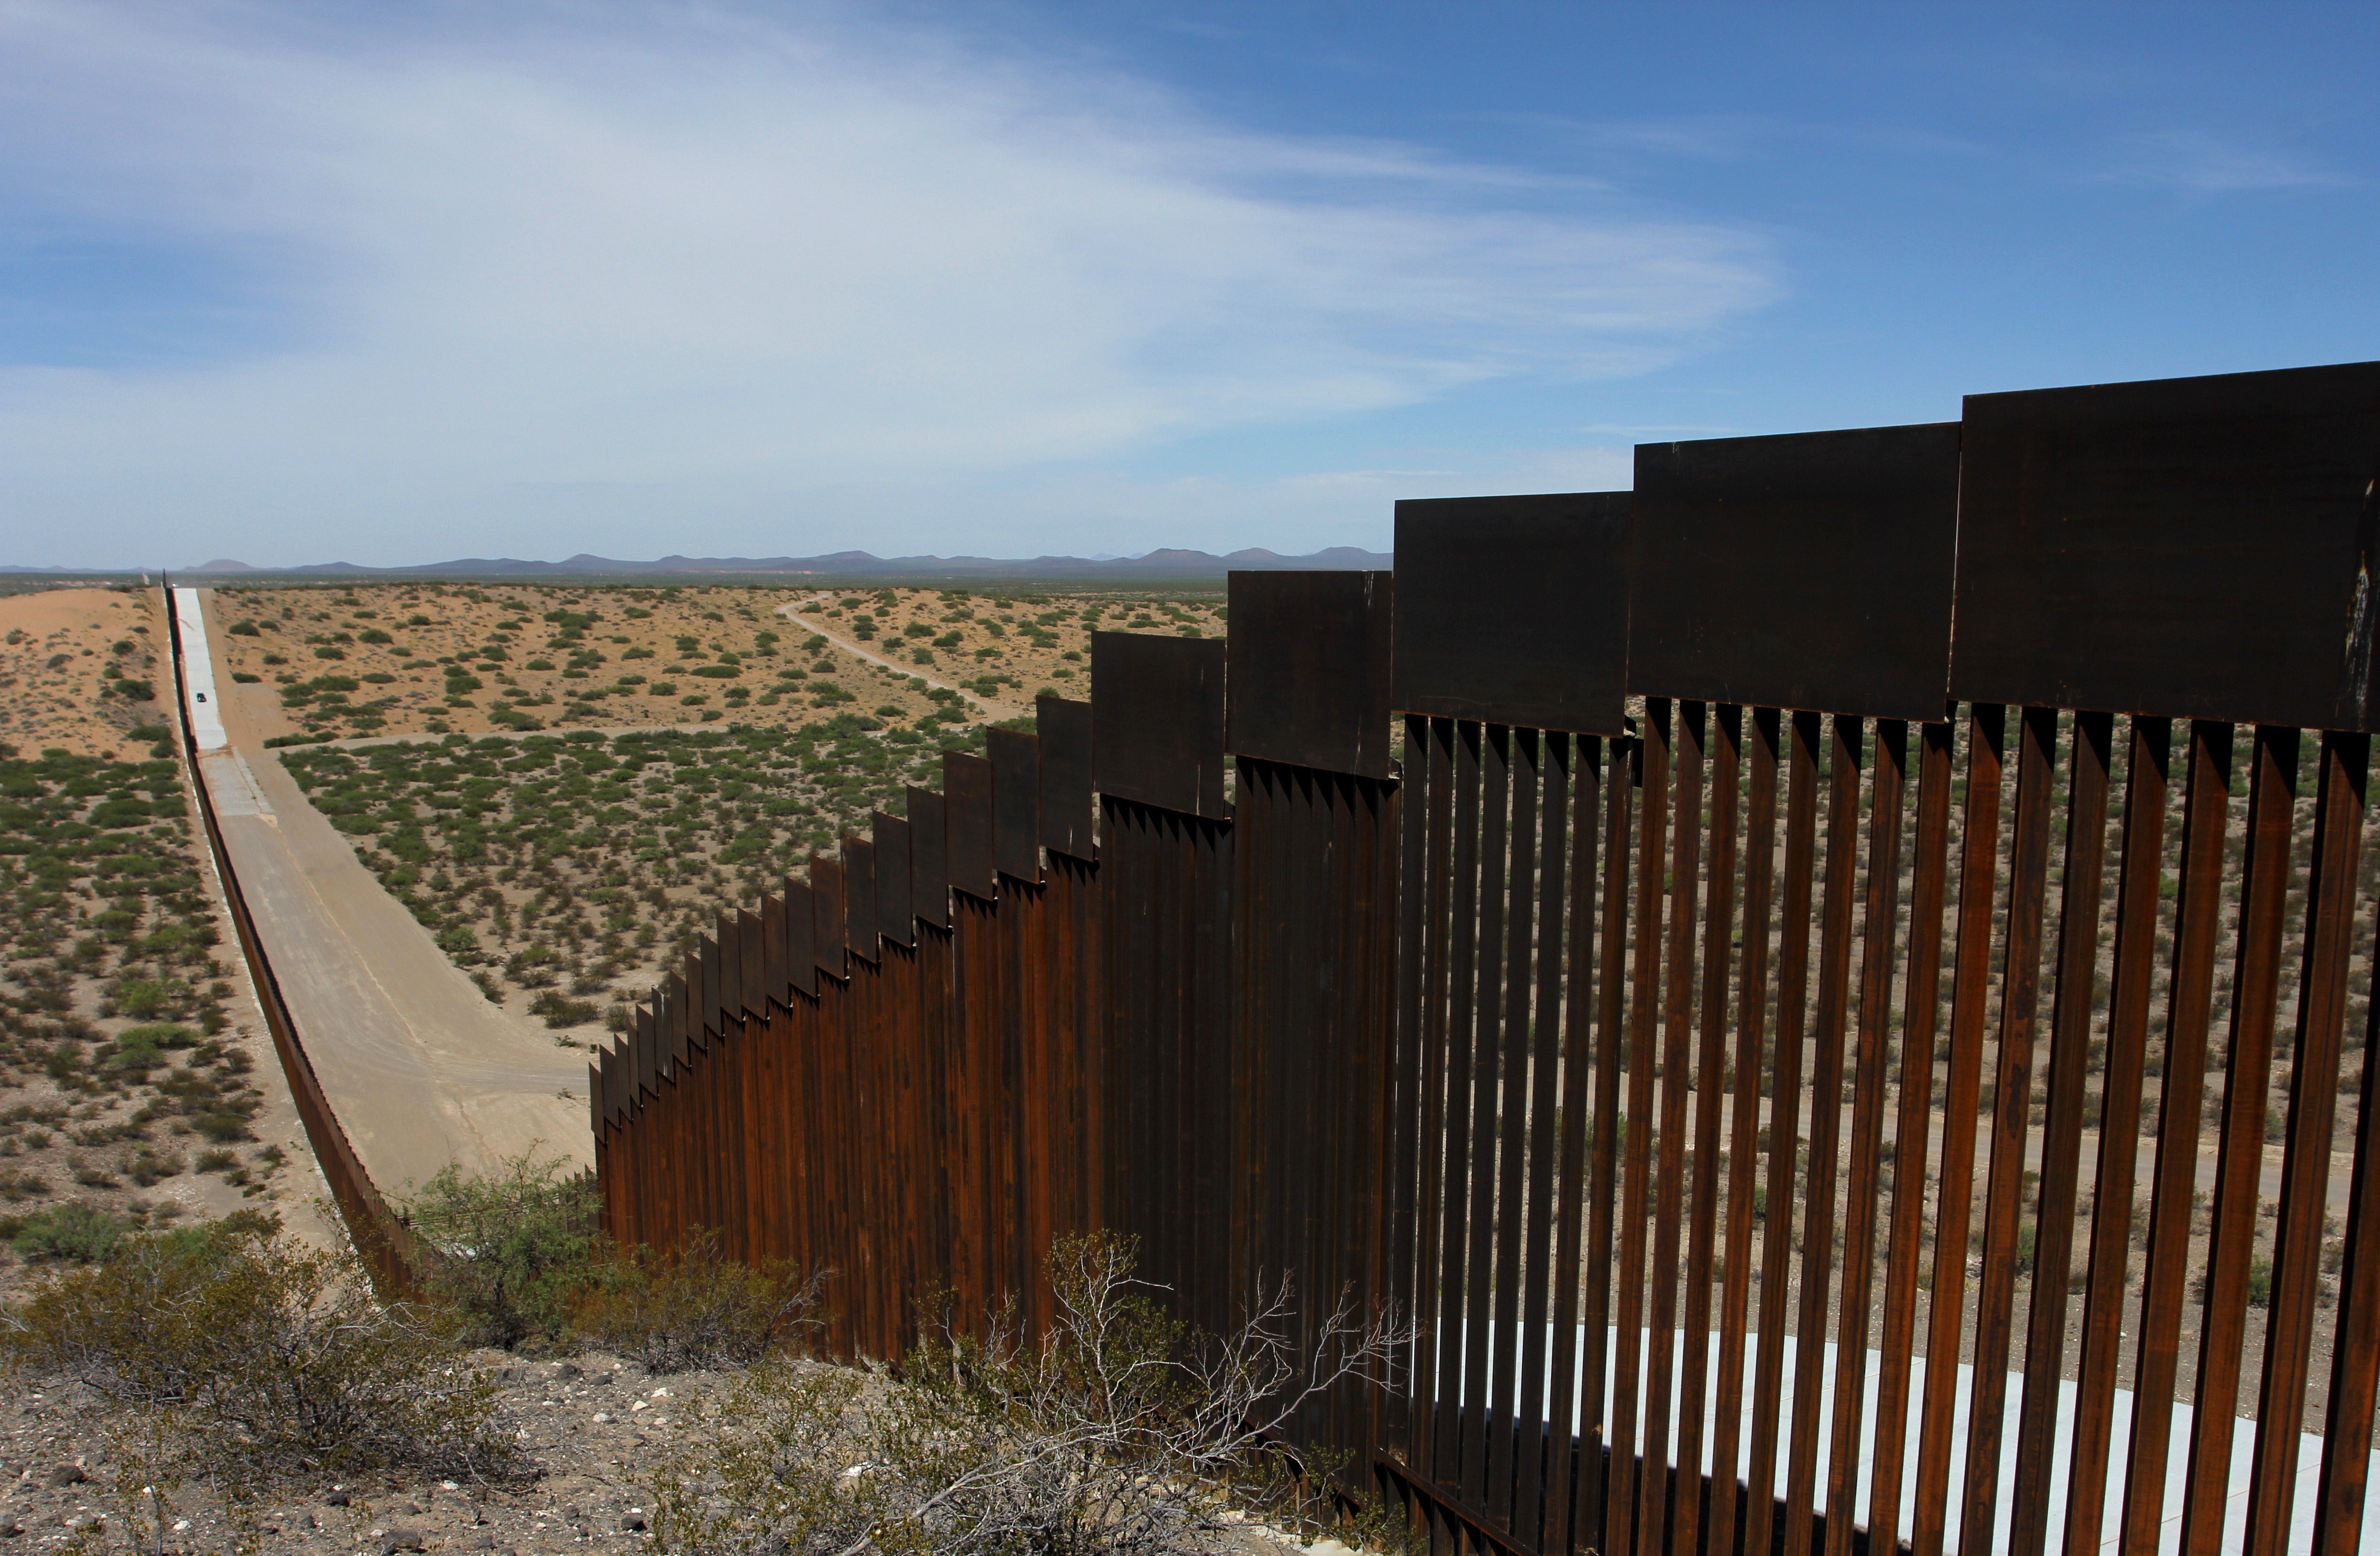 The bodies were found near to the US-Mexico border